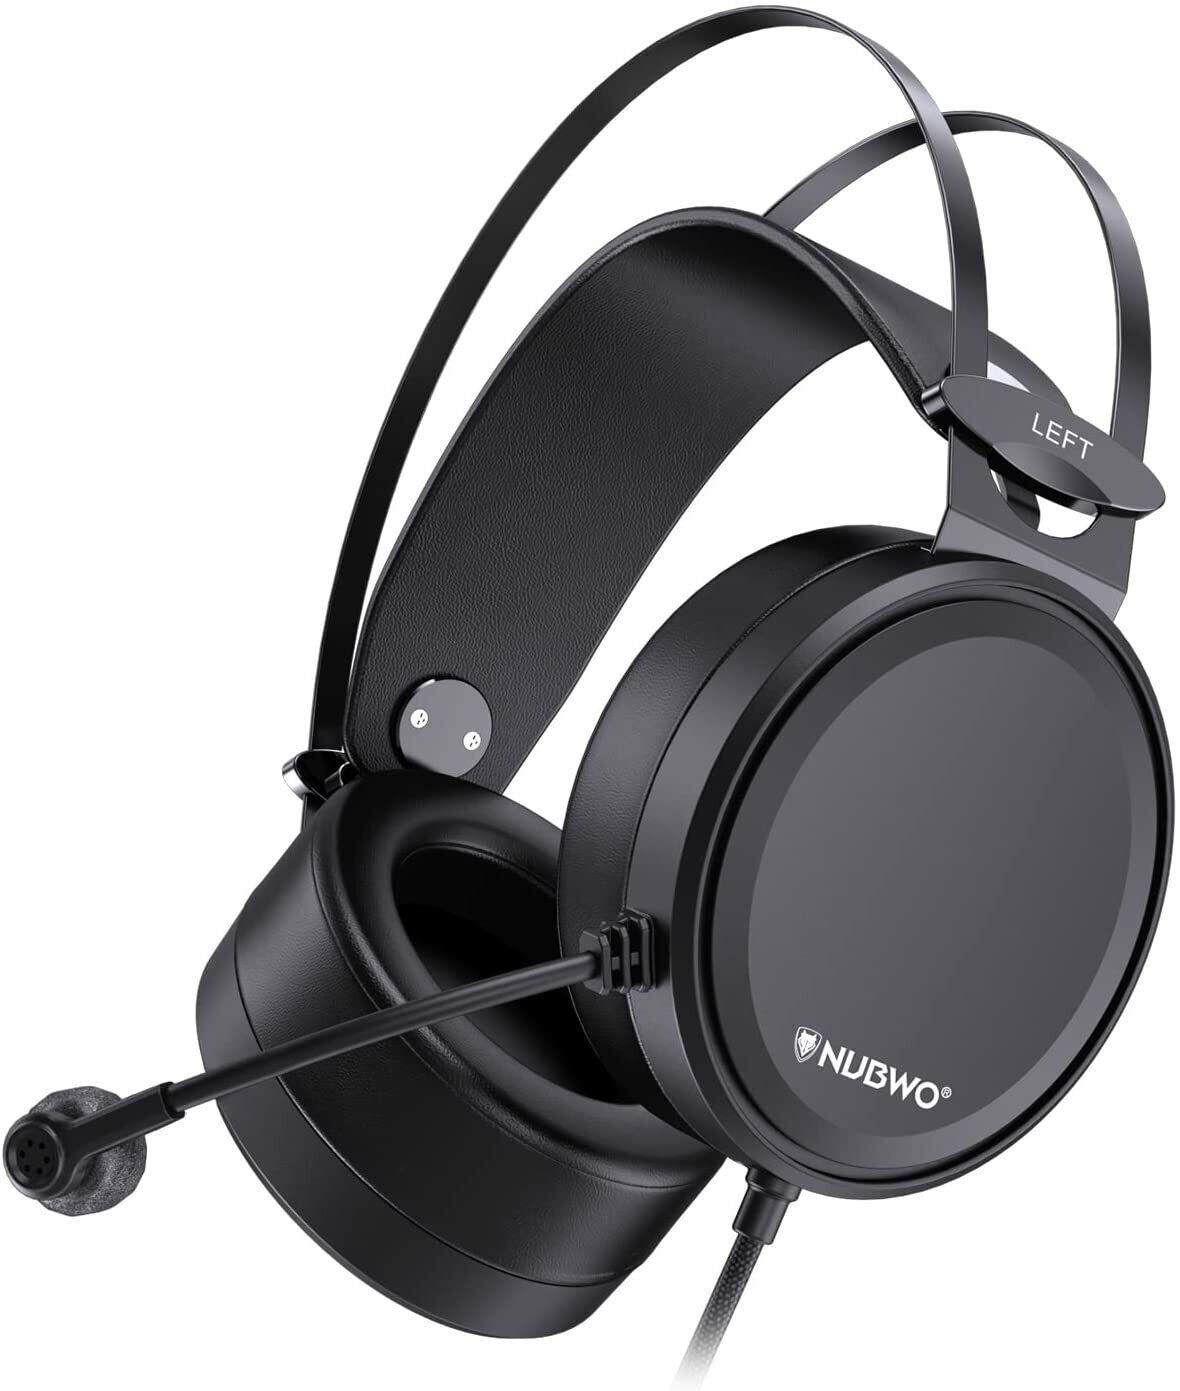 A picture of the NUBWO N7 Gaming Headset